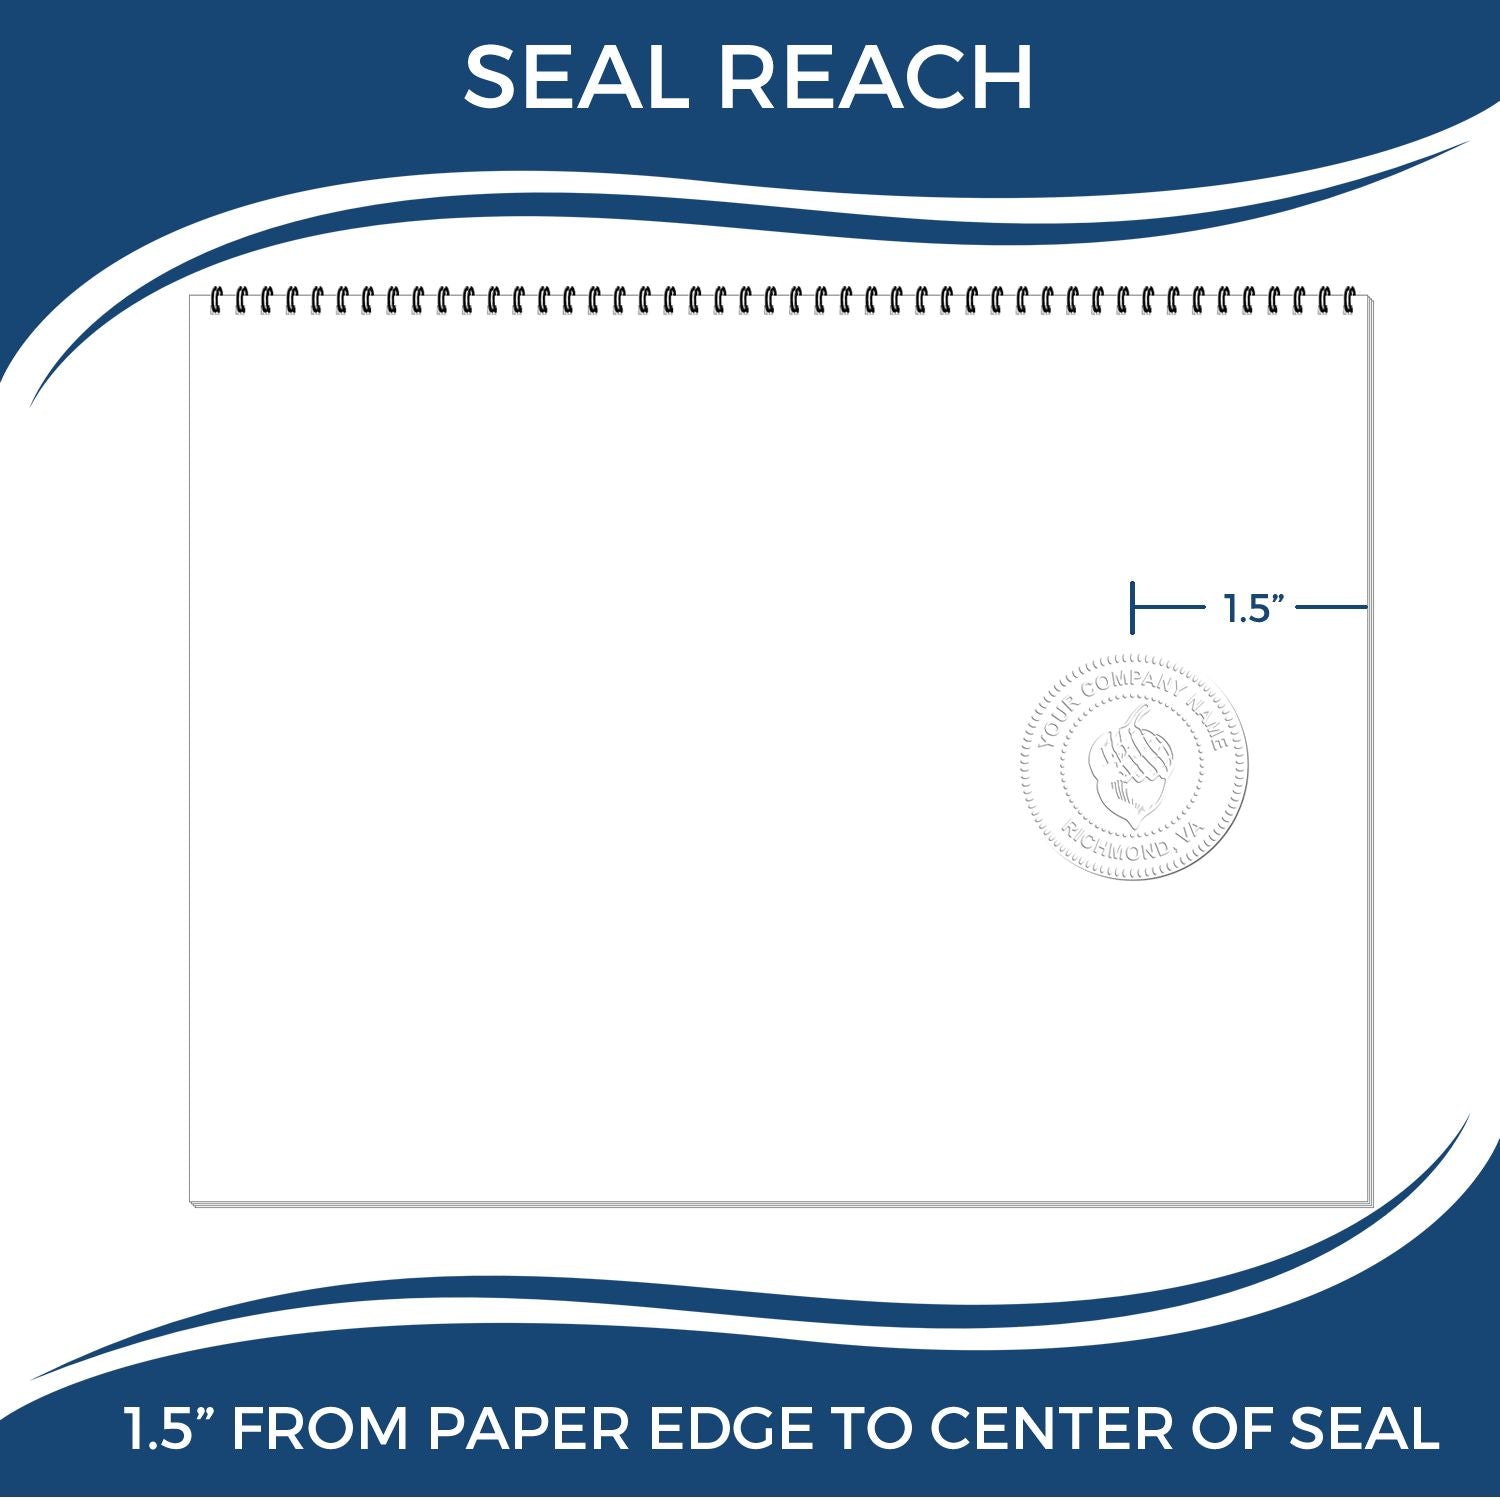 An infographic showing the seal reach which is represented by a ruler and a miniature seal image of the Handheld Virginia Land Surveyor Seal